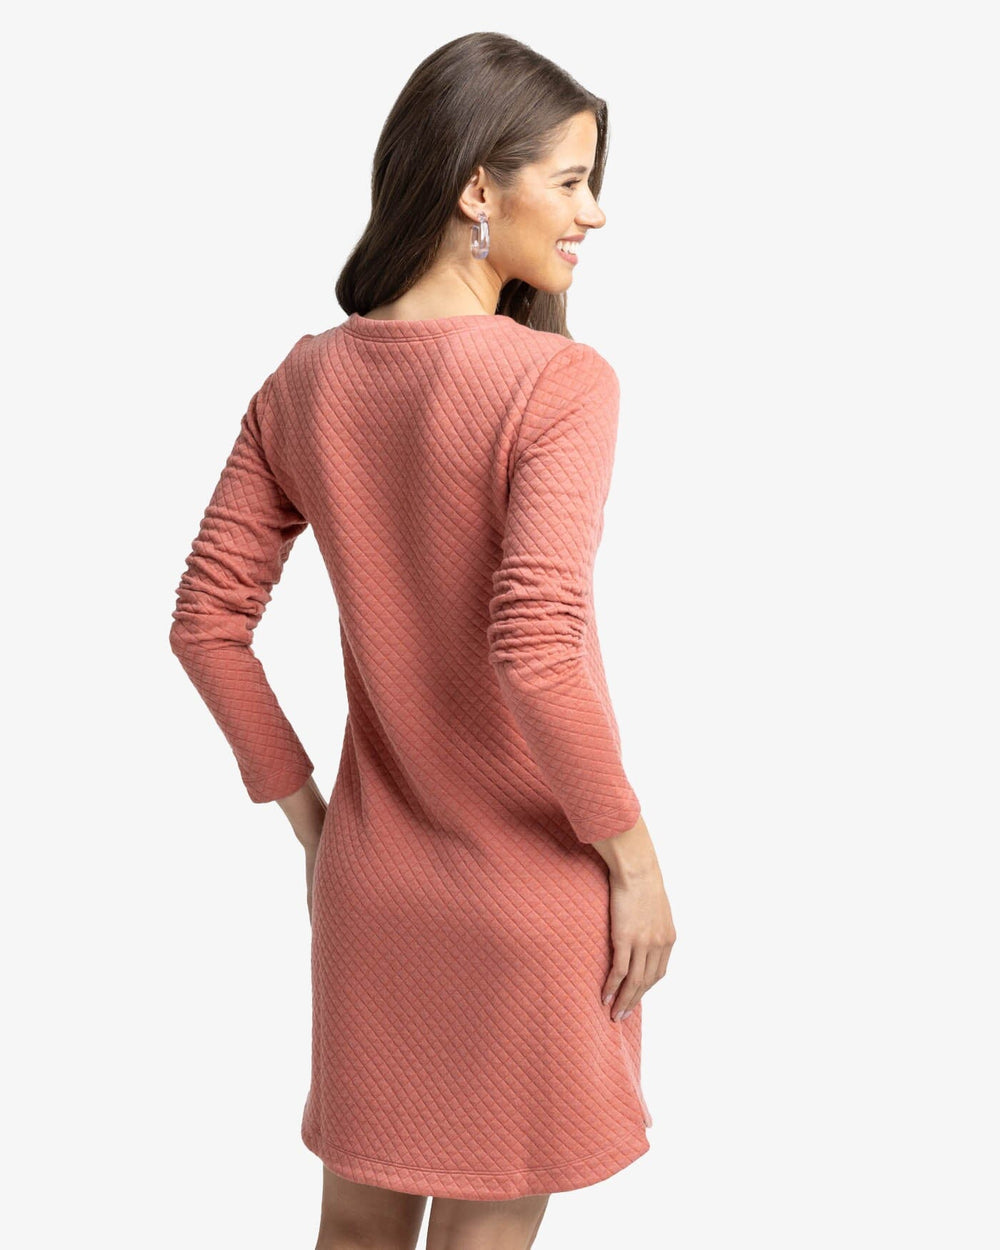 The back view of the Southern Tide Milani Texture Dress by Southern Tide - Dusty Coral